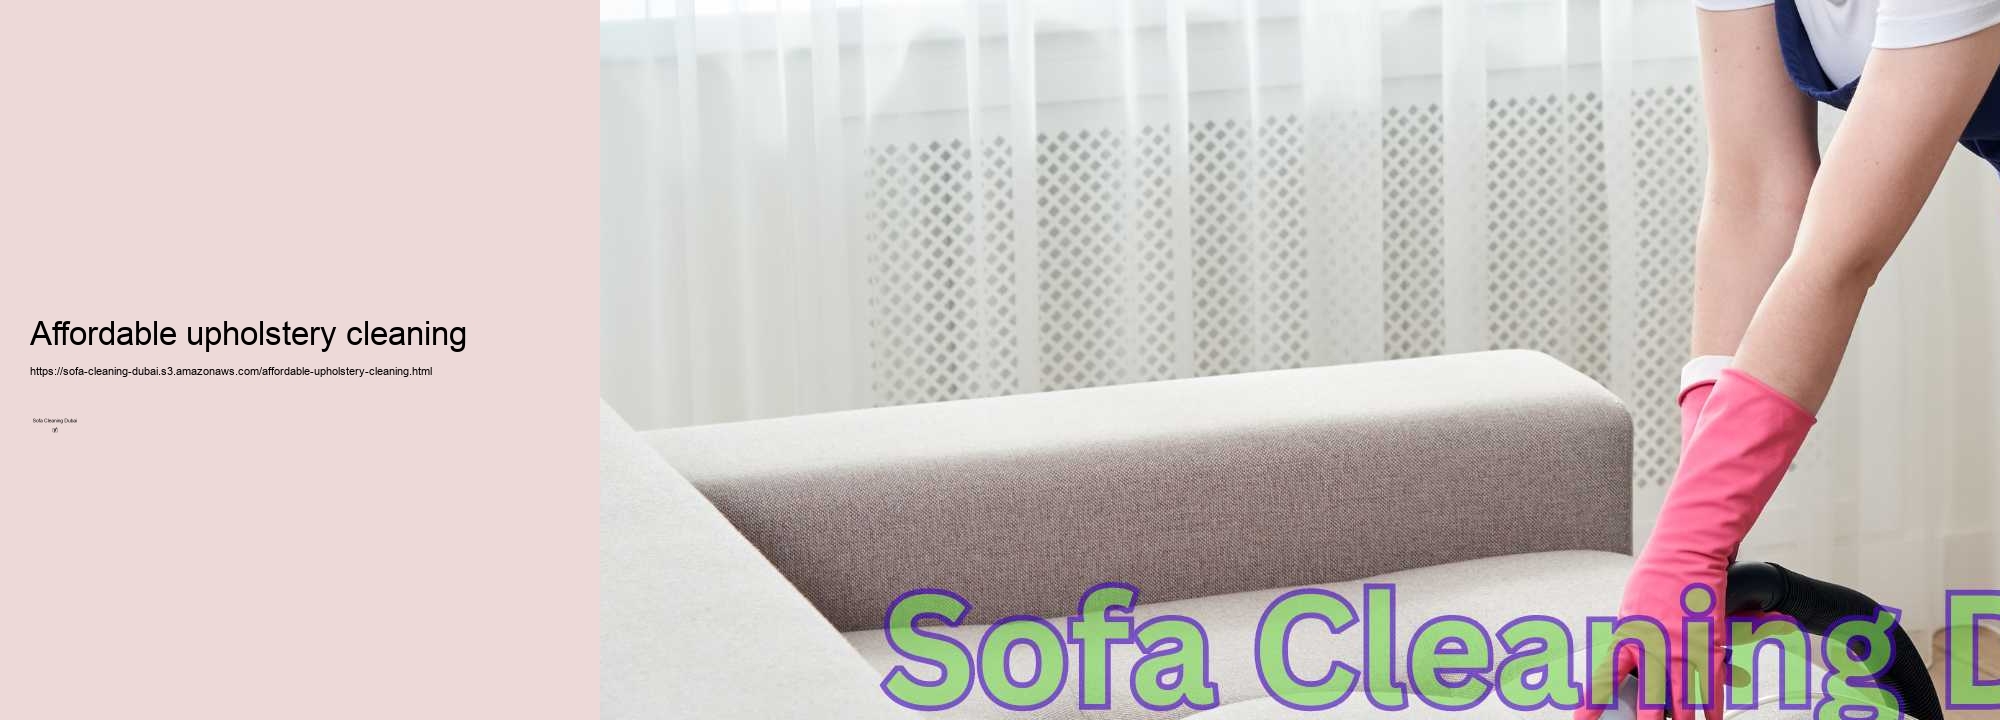 Affordable upholstery cleaning